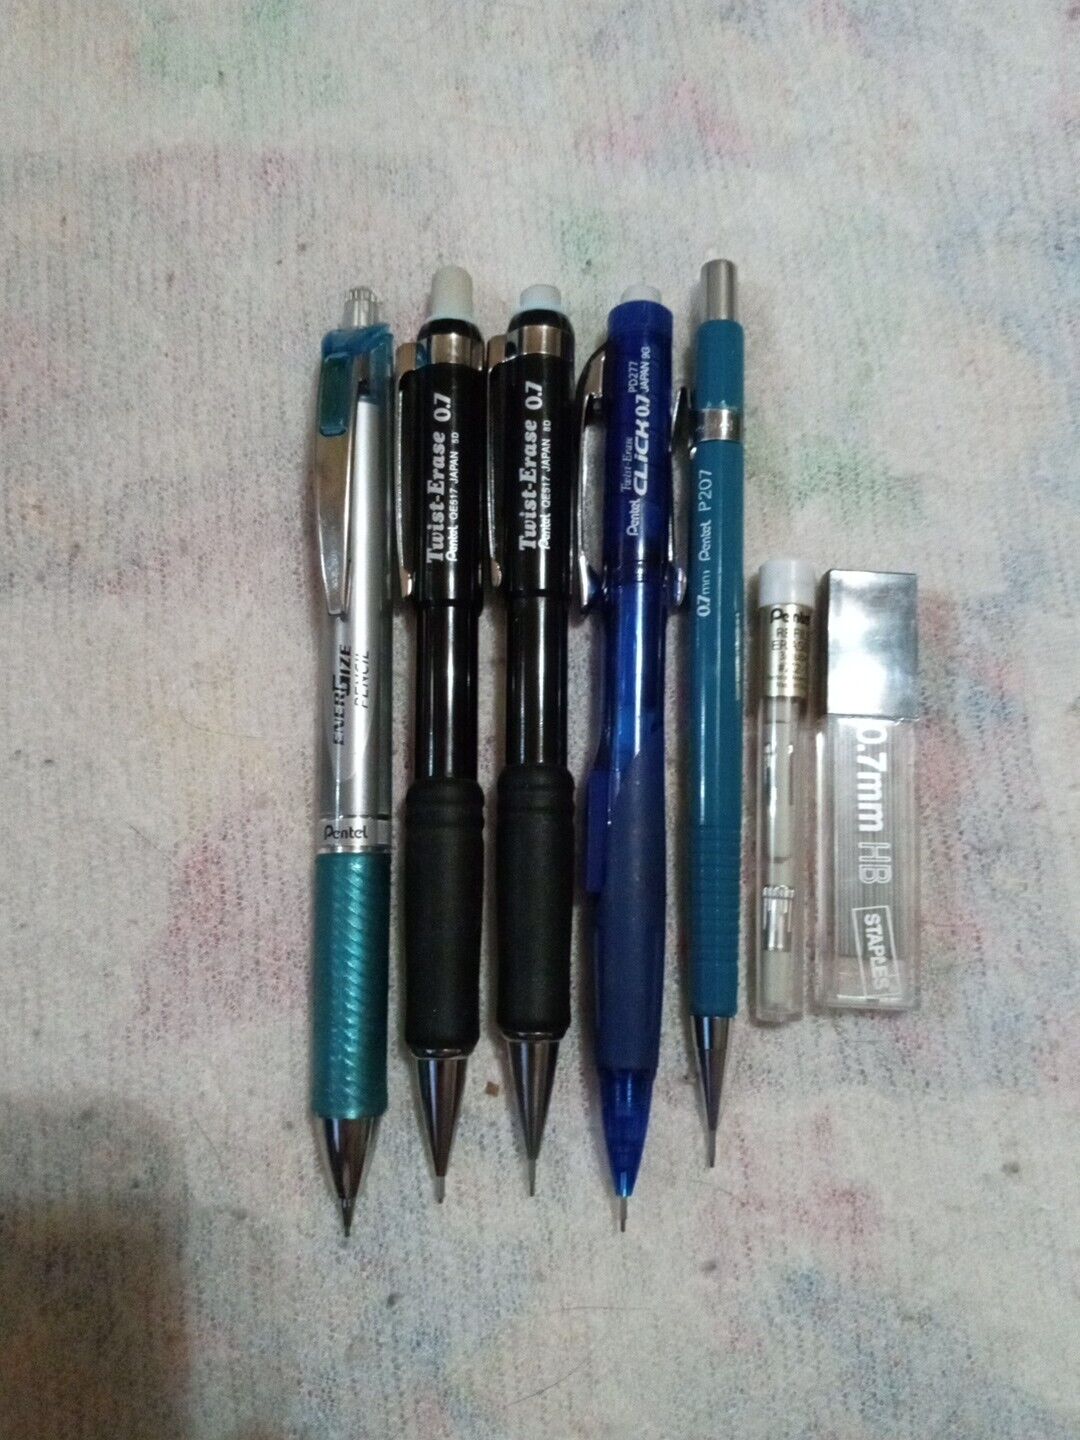 Vintage Pentel Mechanical Pencil Lot Of 5 And Accessories Works Great Very Nice